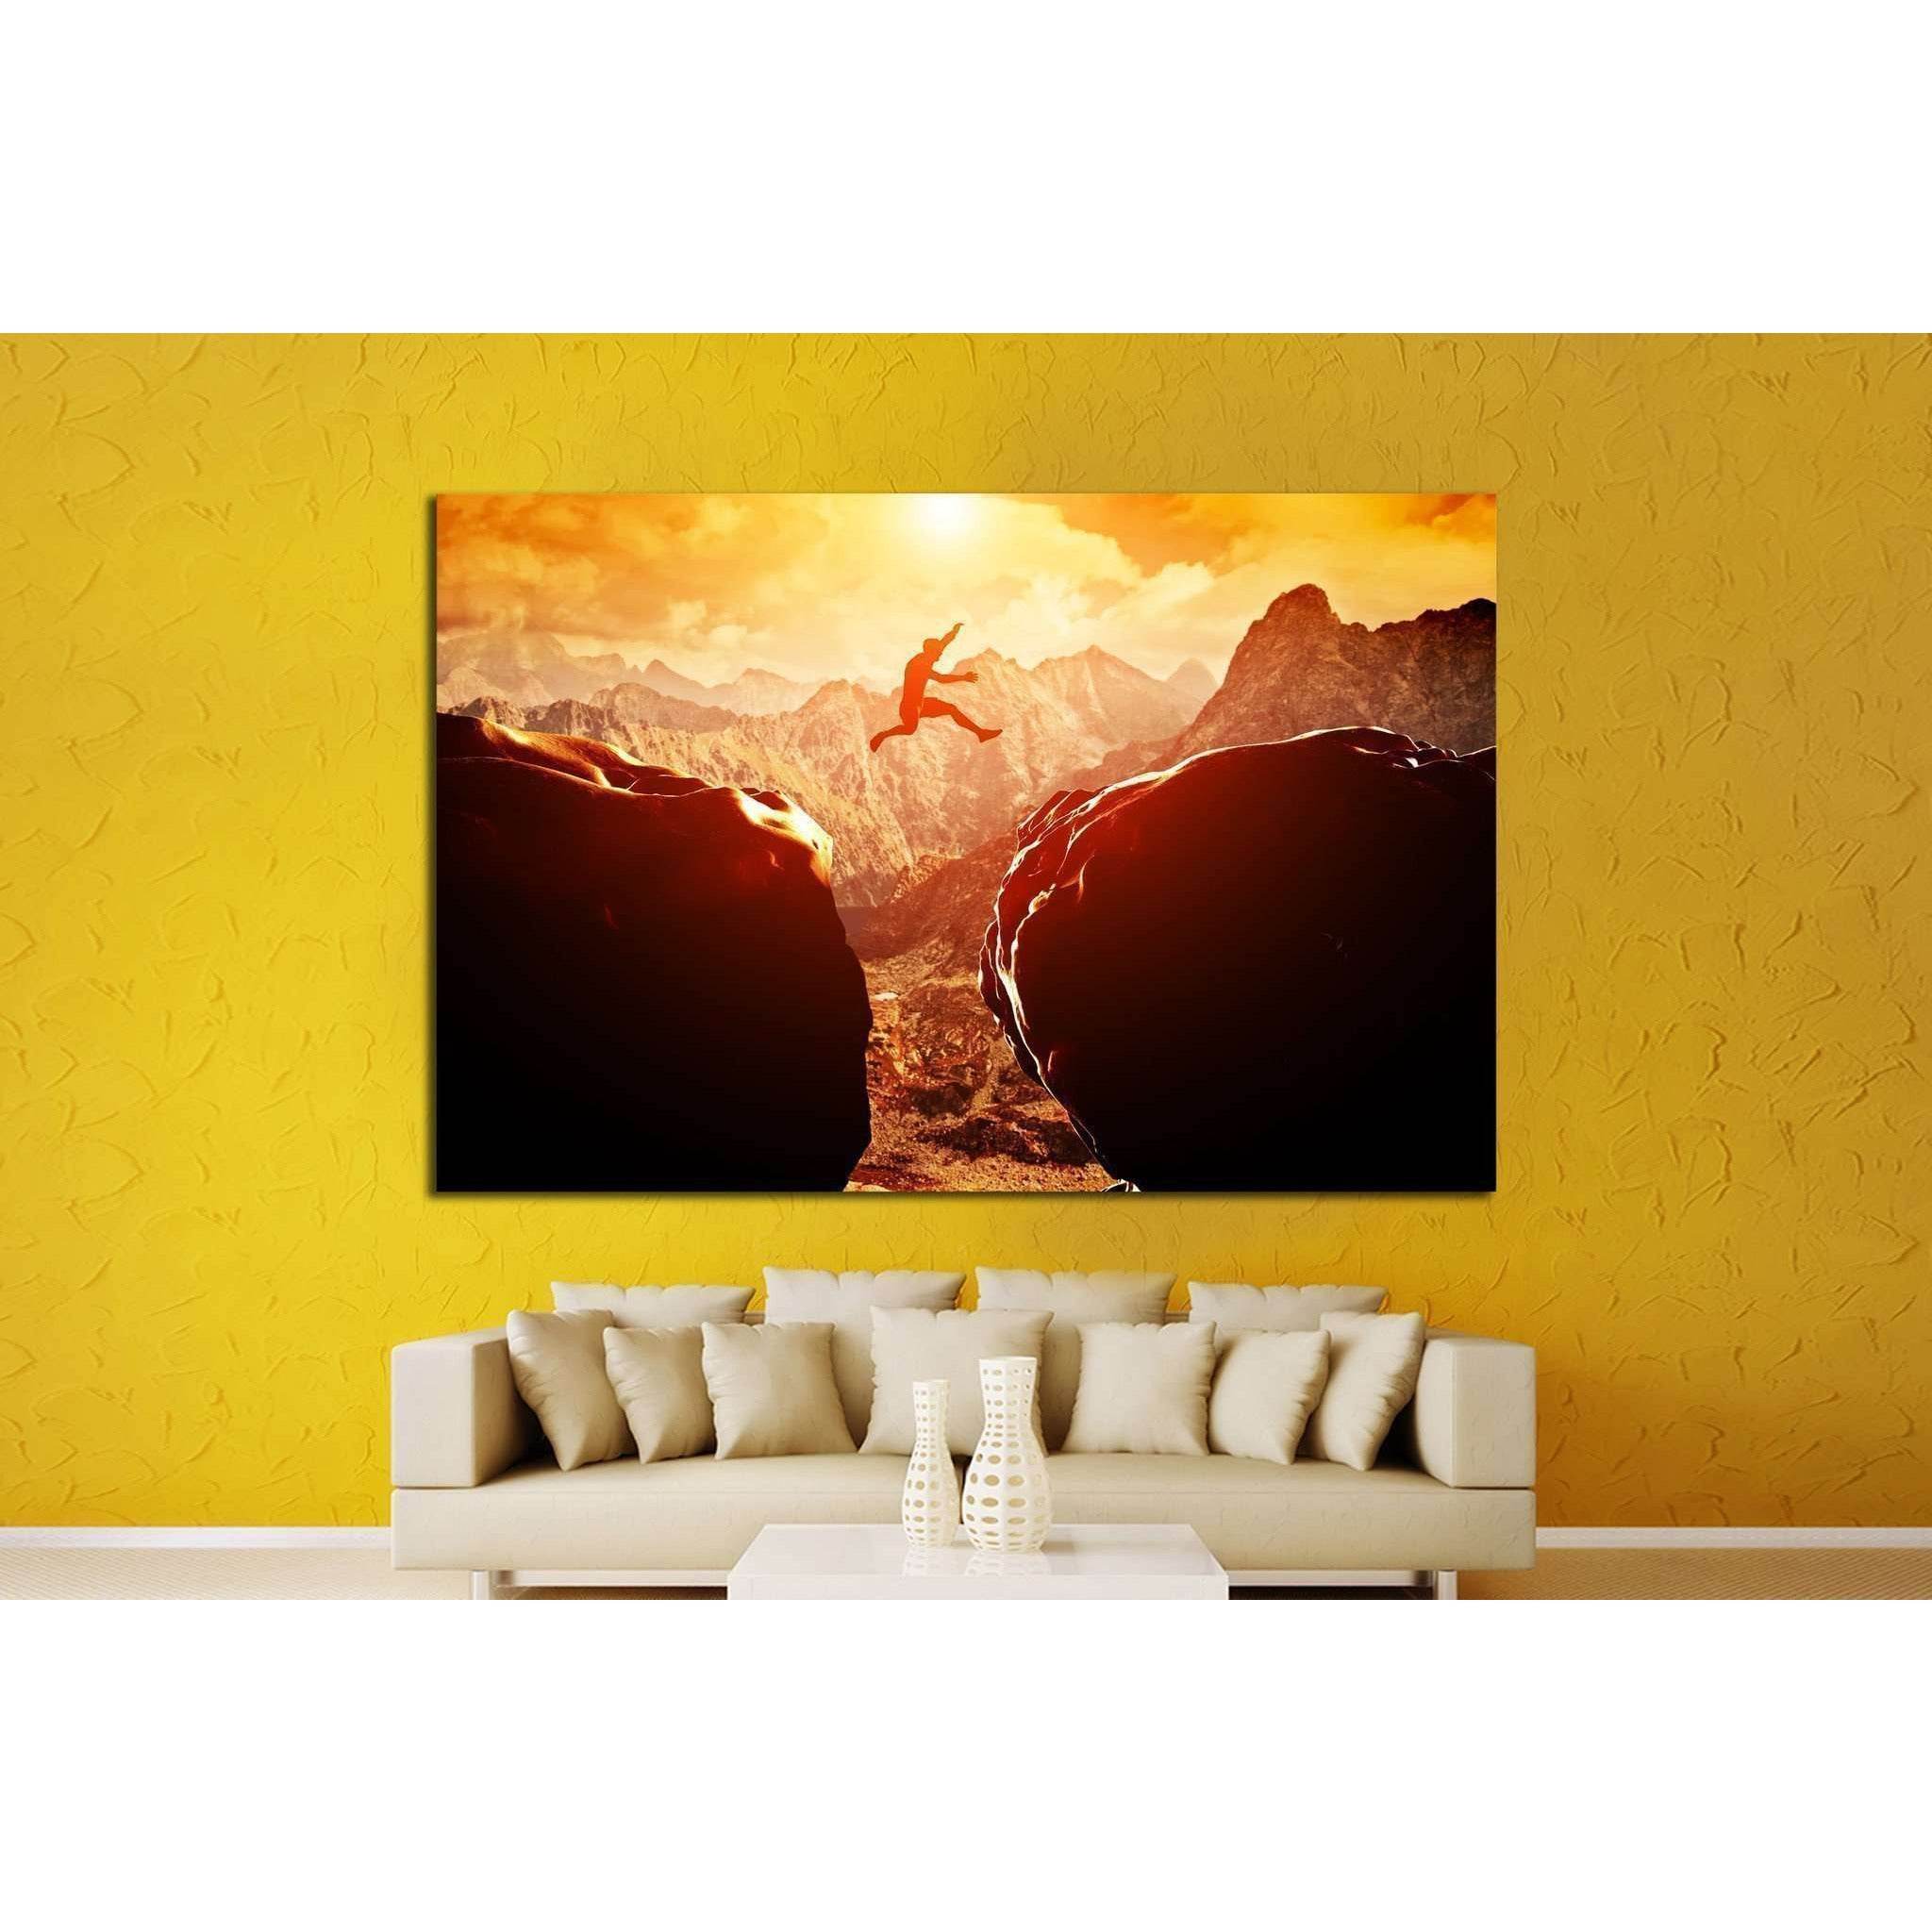 Man jumping over precipice between two rocky mountains №1373 Ready to Hang Canvas Print